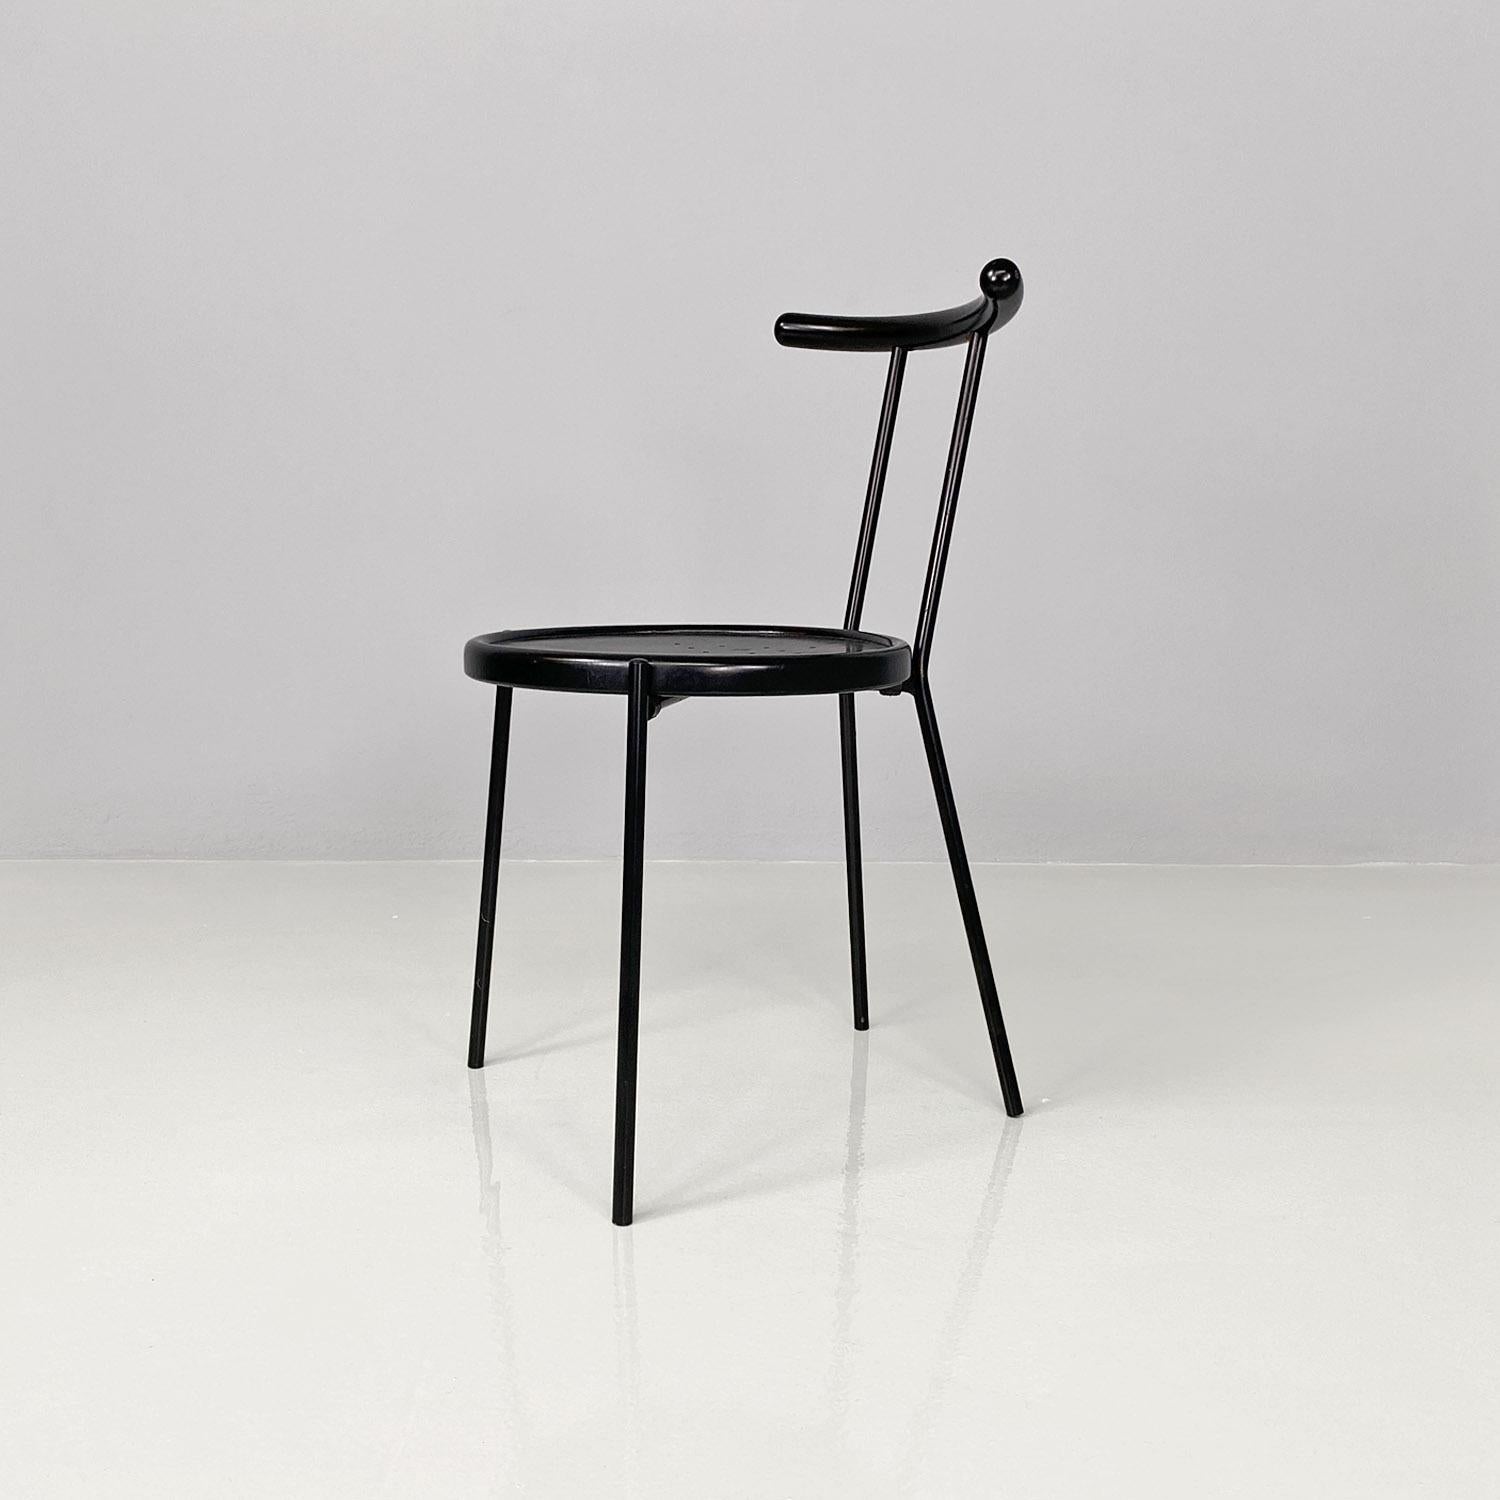 Italian modern round black wood and metal chair, 1980s For Sale 2